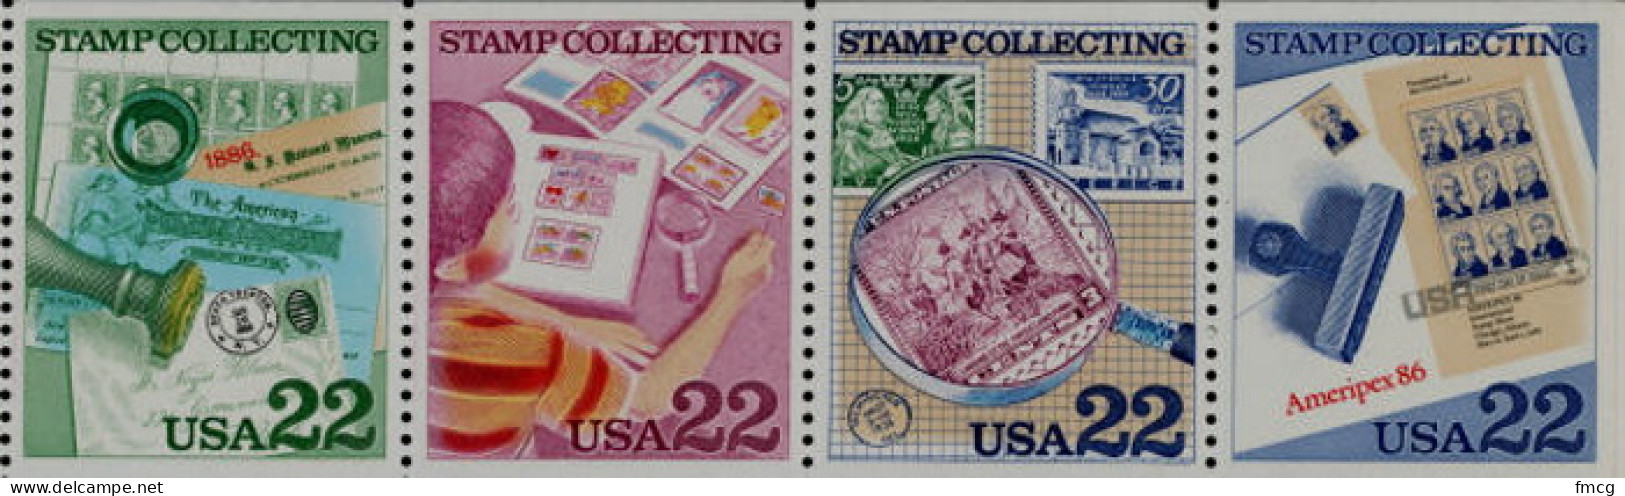 1986 22 Cents Stamp Collecting, Booklet Pane Of 4, MNH - Unused Stamps